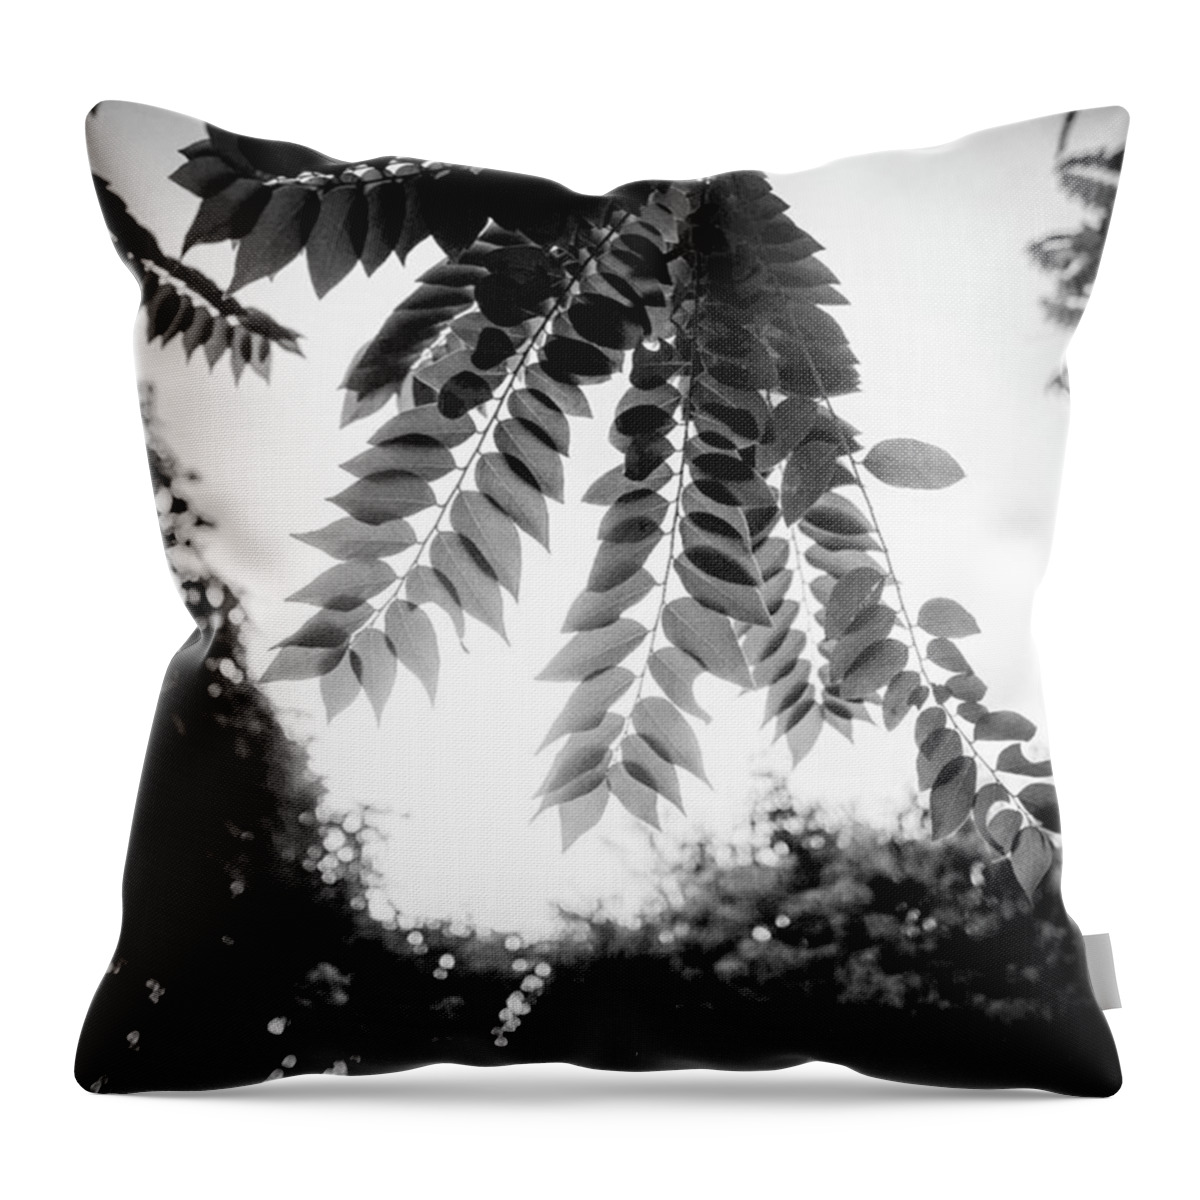 Littlebeauty Throw Pillow featuring the photograph Repeating Patterns by Aleck Cartwright